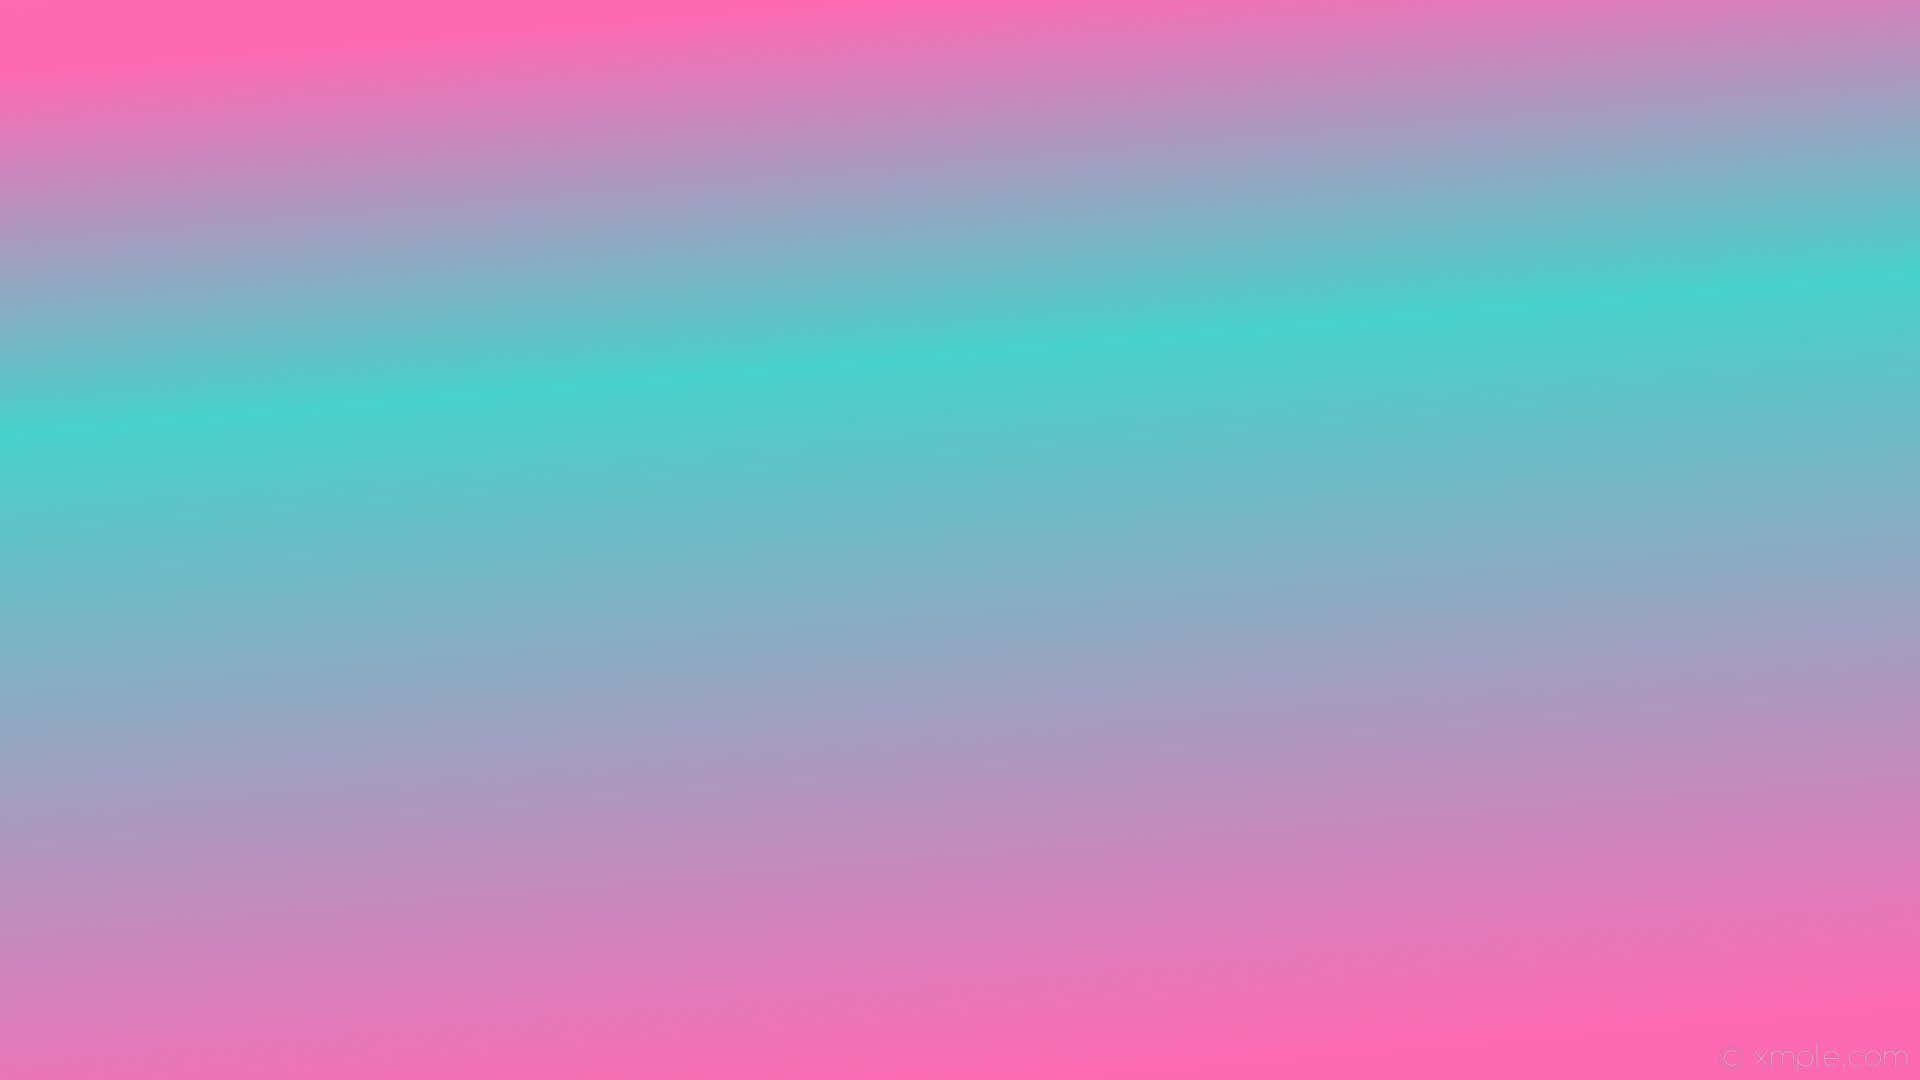 Download Pink And Teal  Wallpaper Pink And Blue Gradient Wallpaper   Wallpaperscom